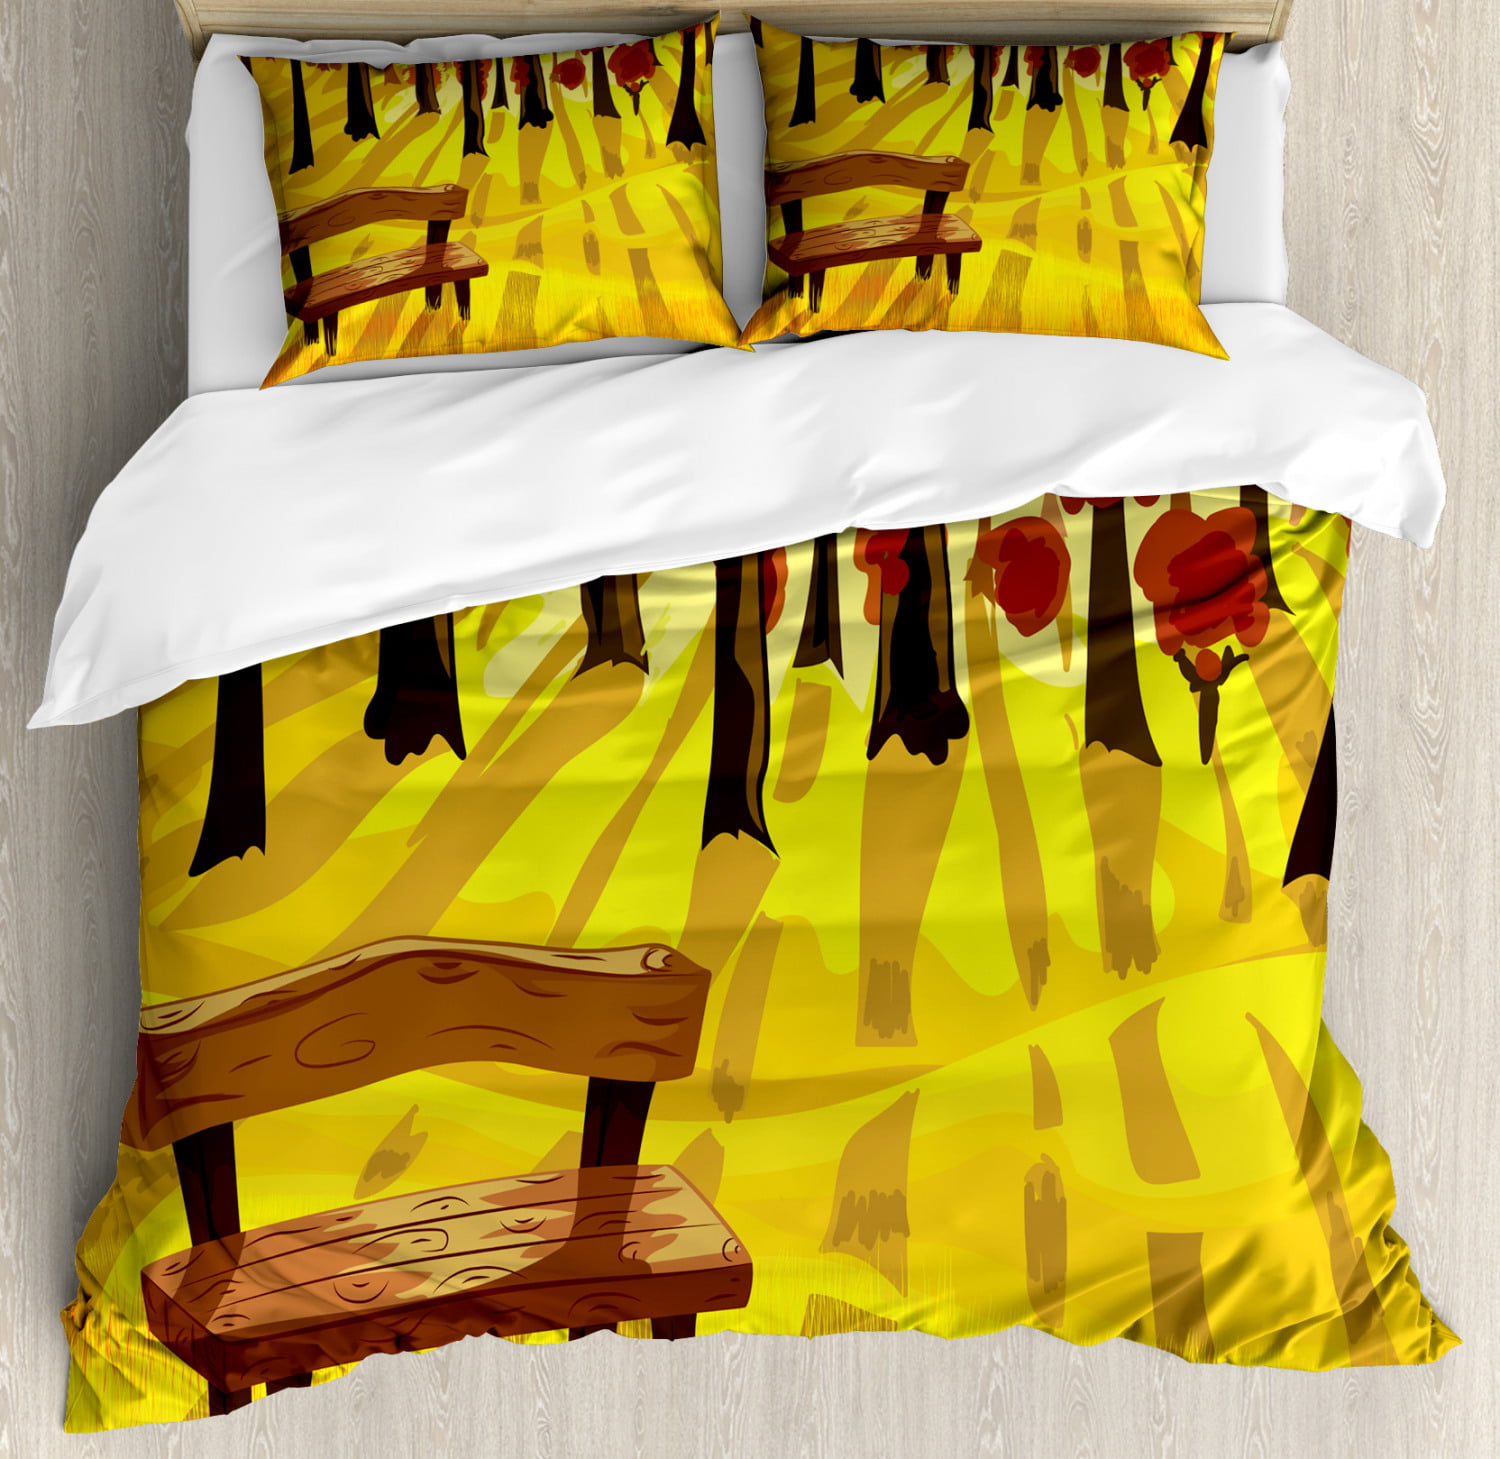 Forest Duvet Cover Set Cartoon Lonely Bench In Autumnal Park With